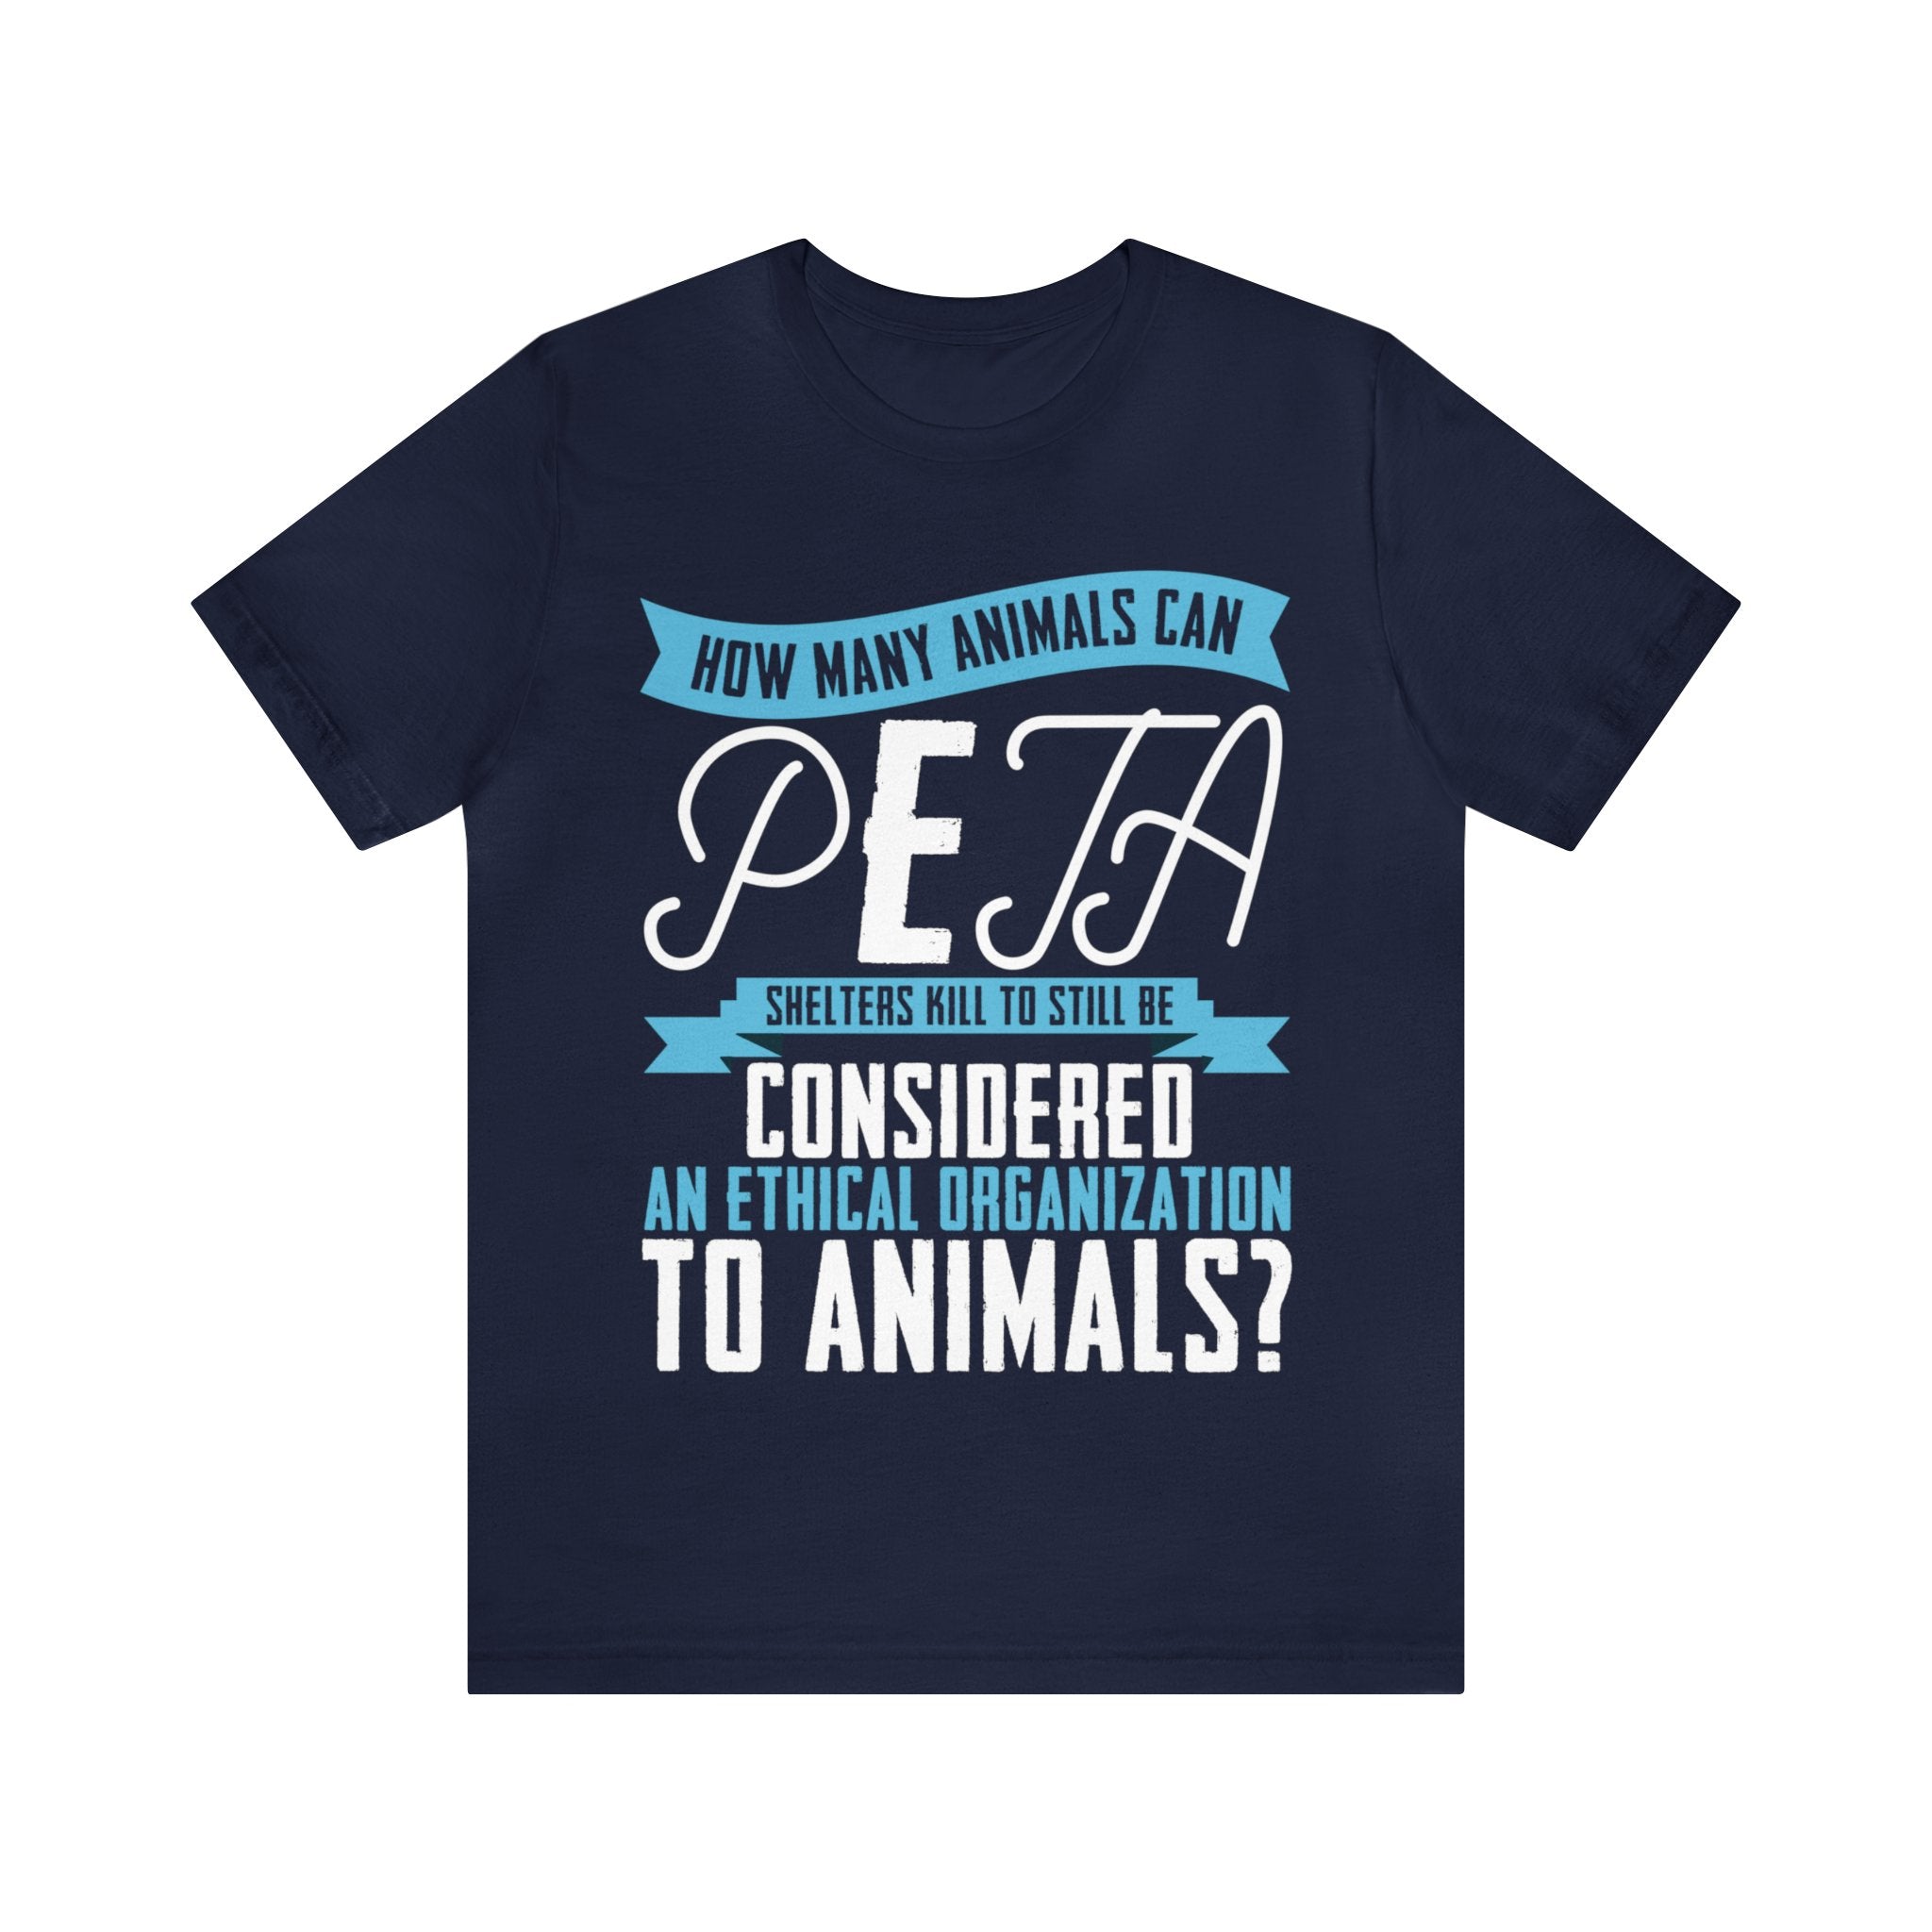 An Ethical Organization to Animals?